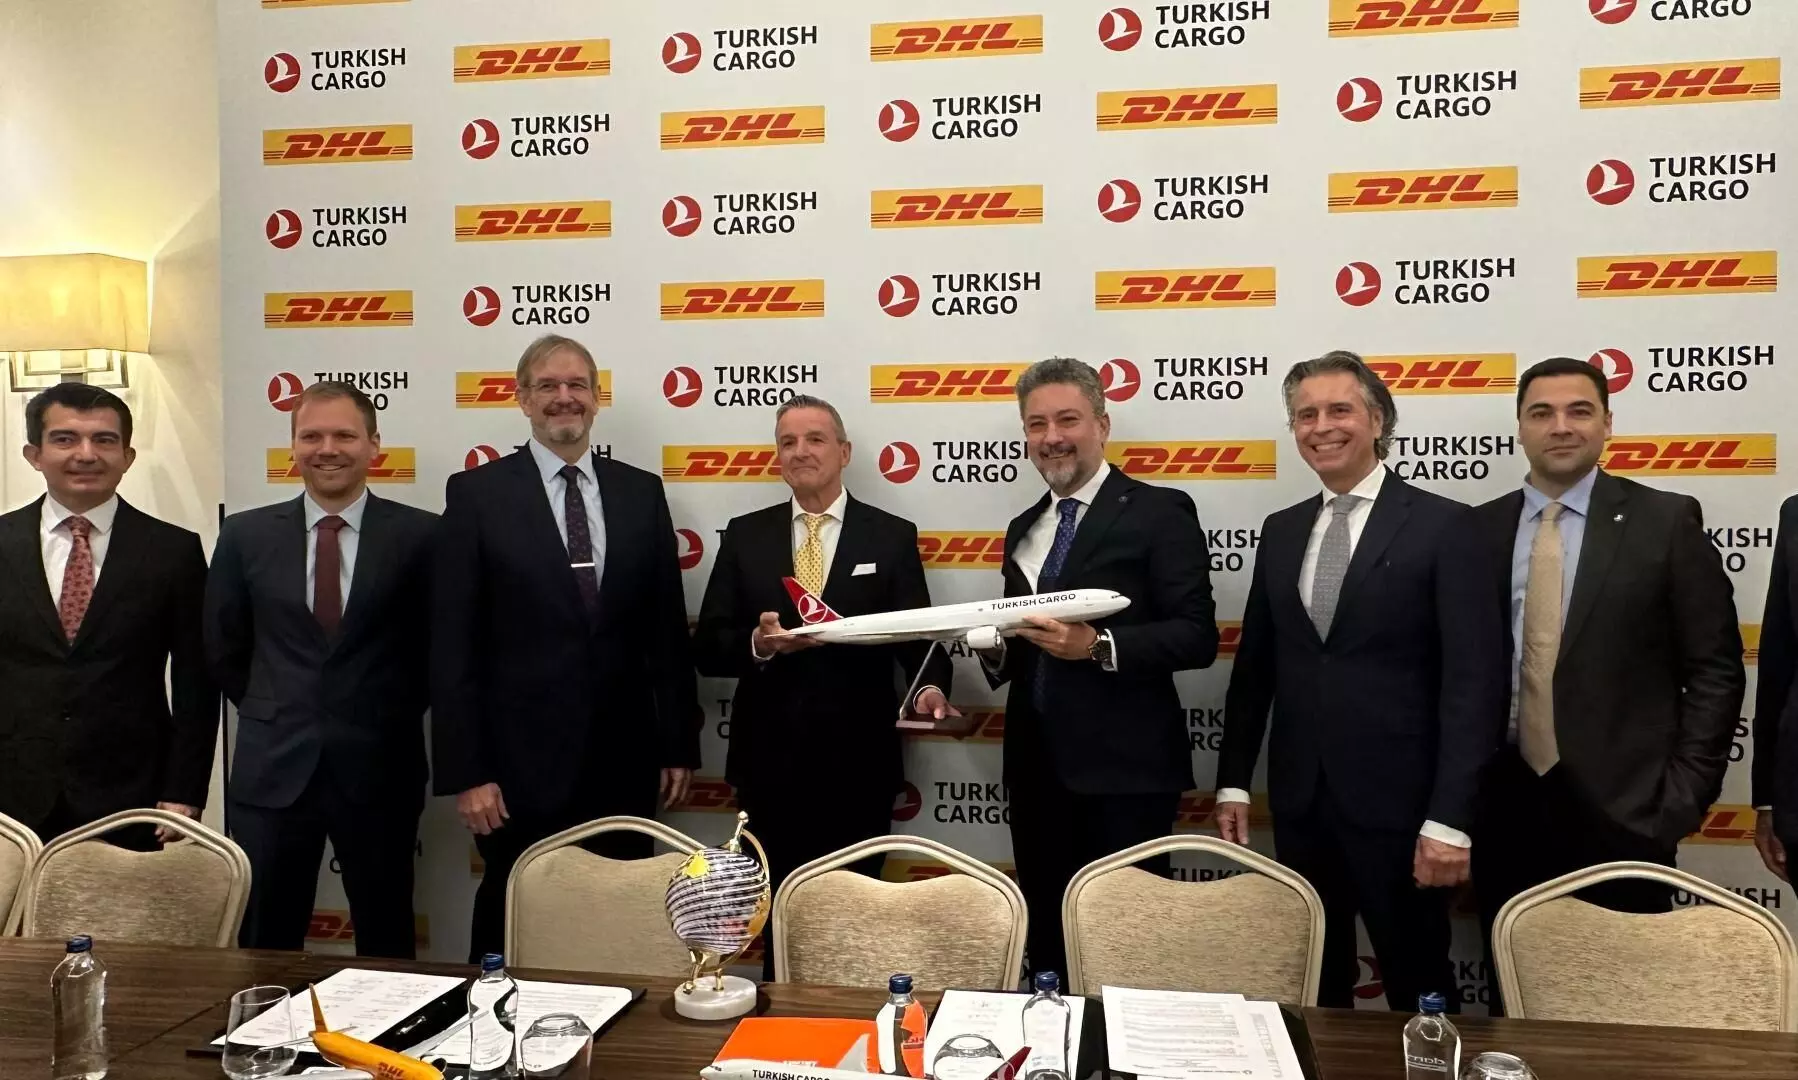 DHL Global Forwarding to leverage Turkish’s cargo hub in Istanbul